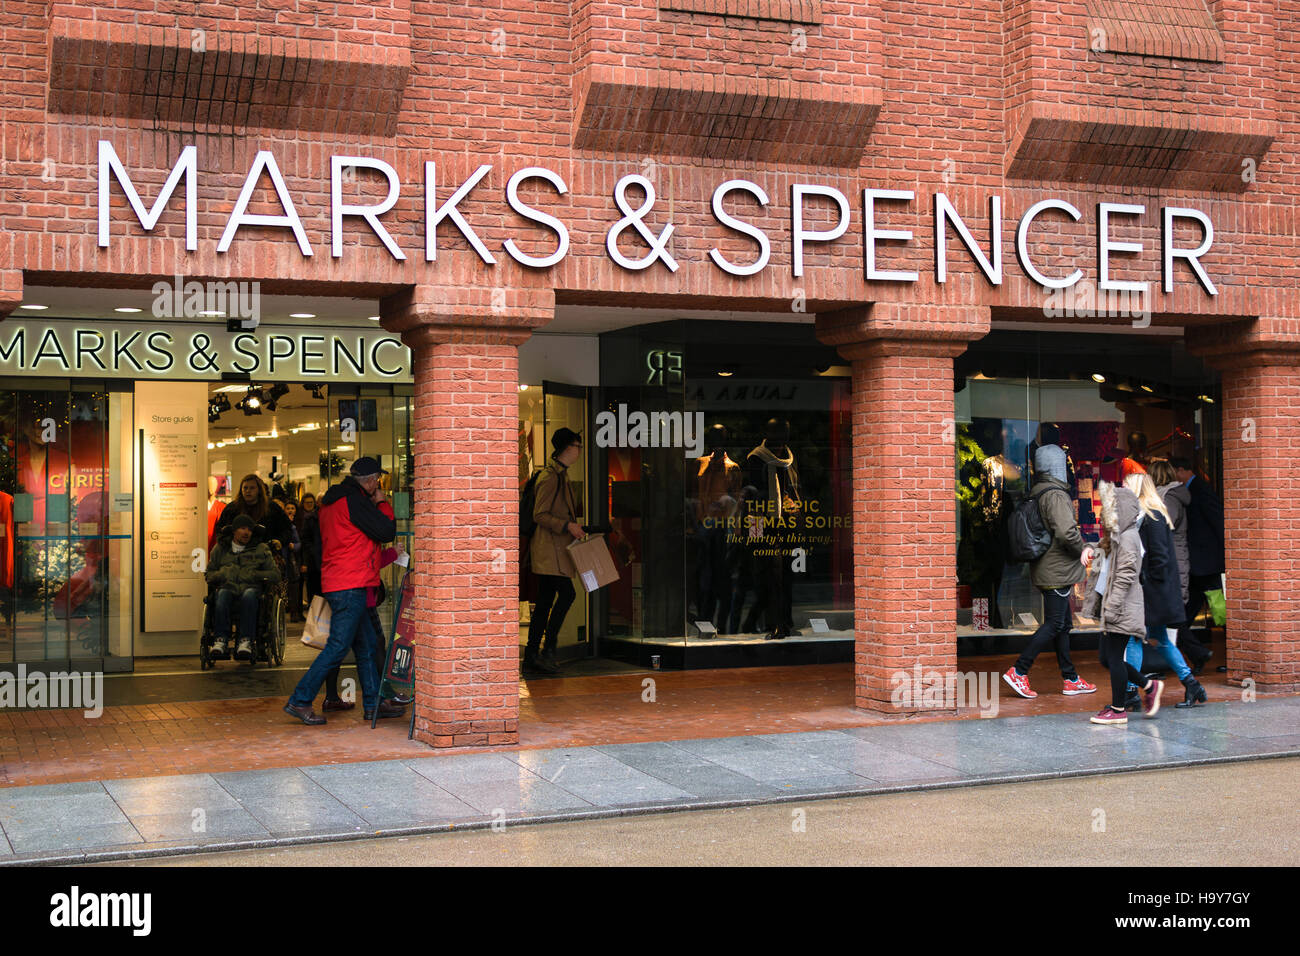 Exeter, England, UK - 22 November 2016: Unidentified people walk by Marks & Spencer store on High Street Stock Photo